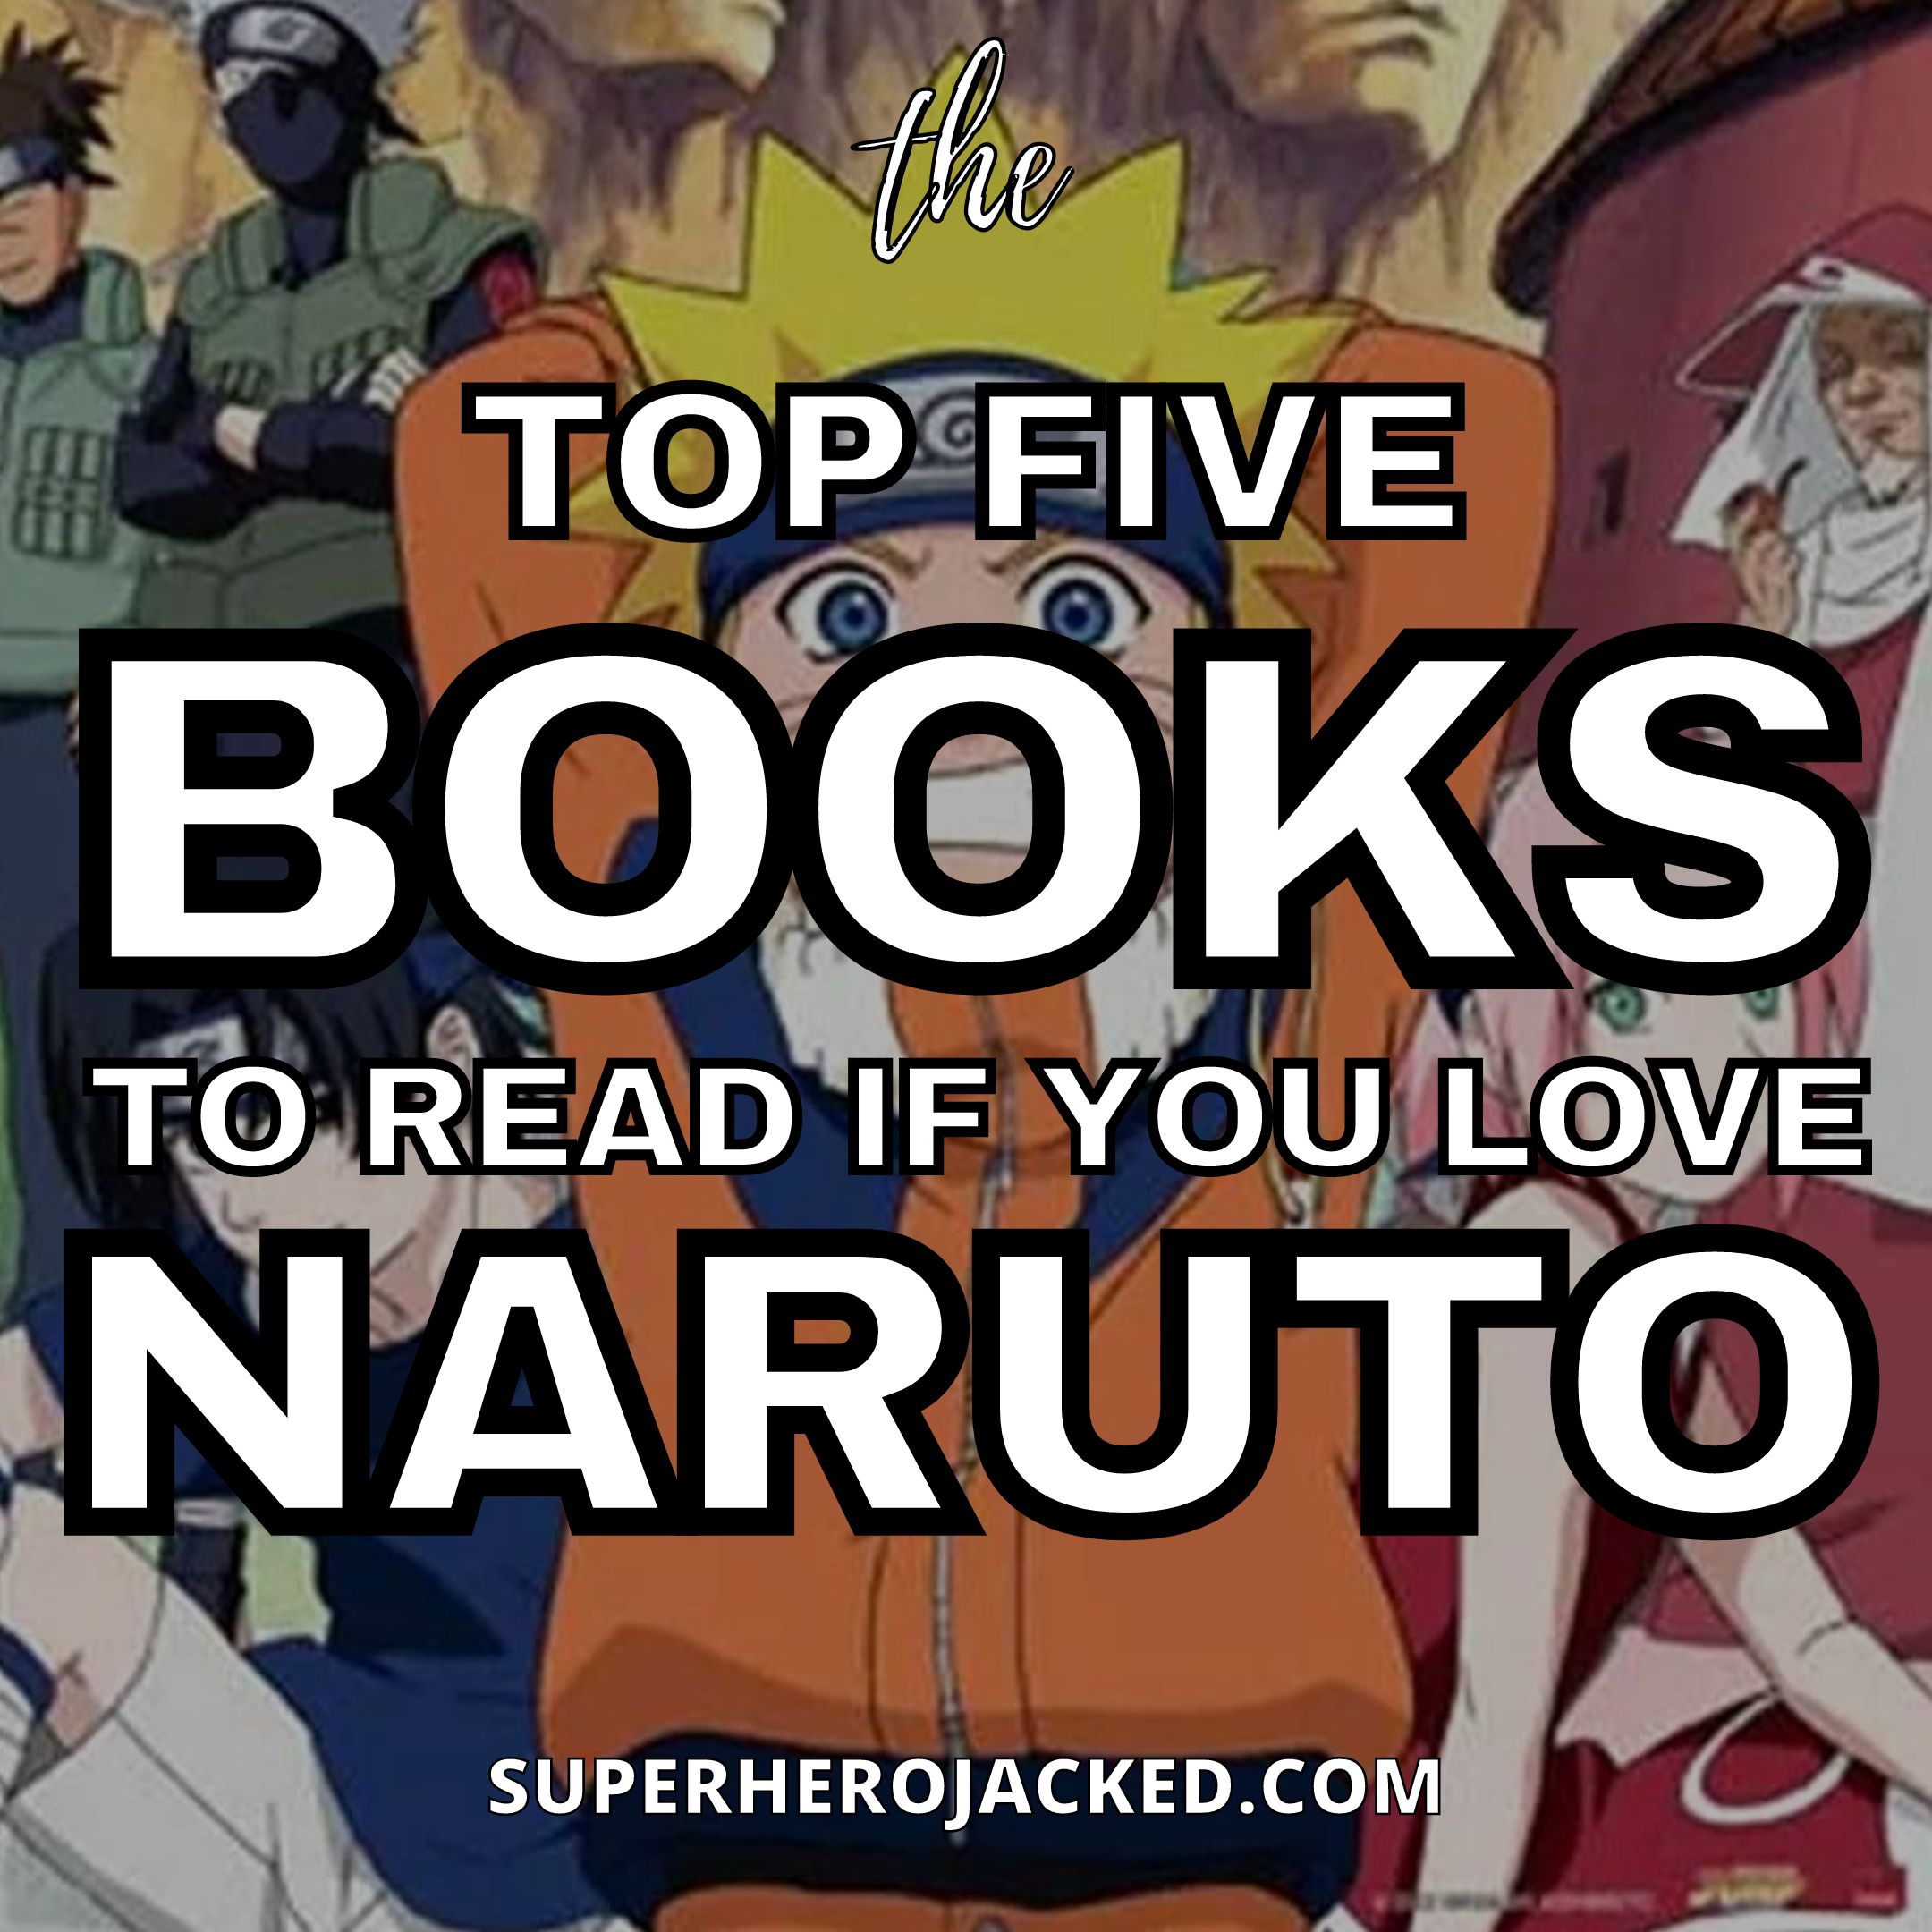 chip custer recommends where to read naruto pic